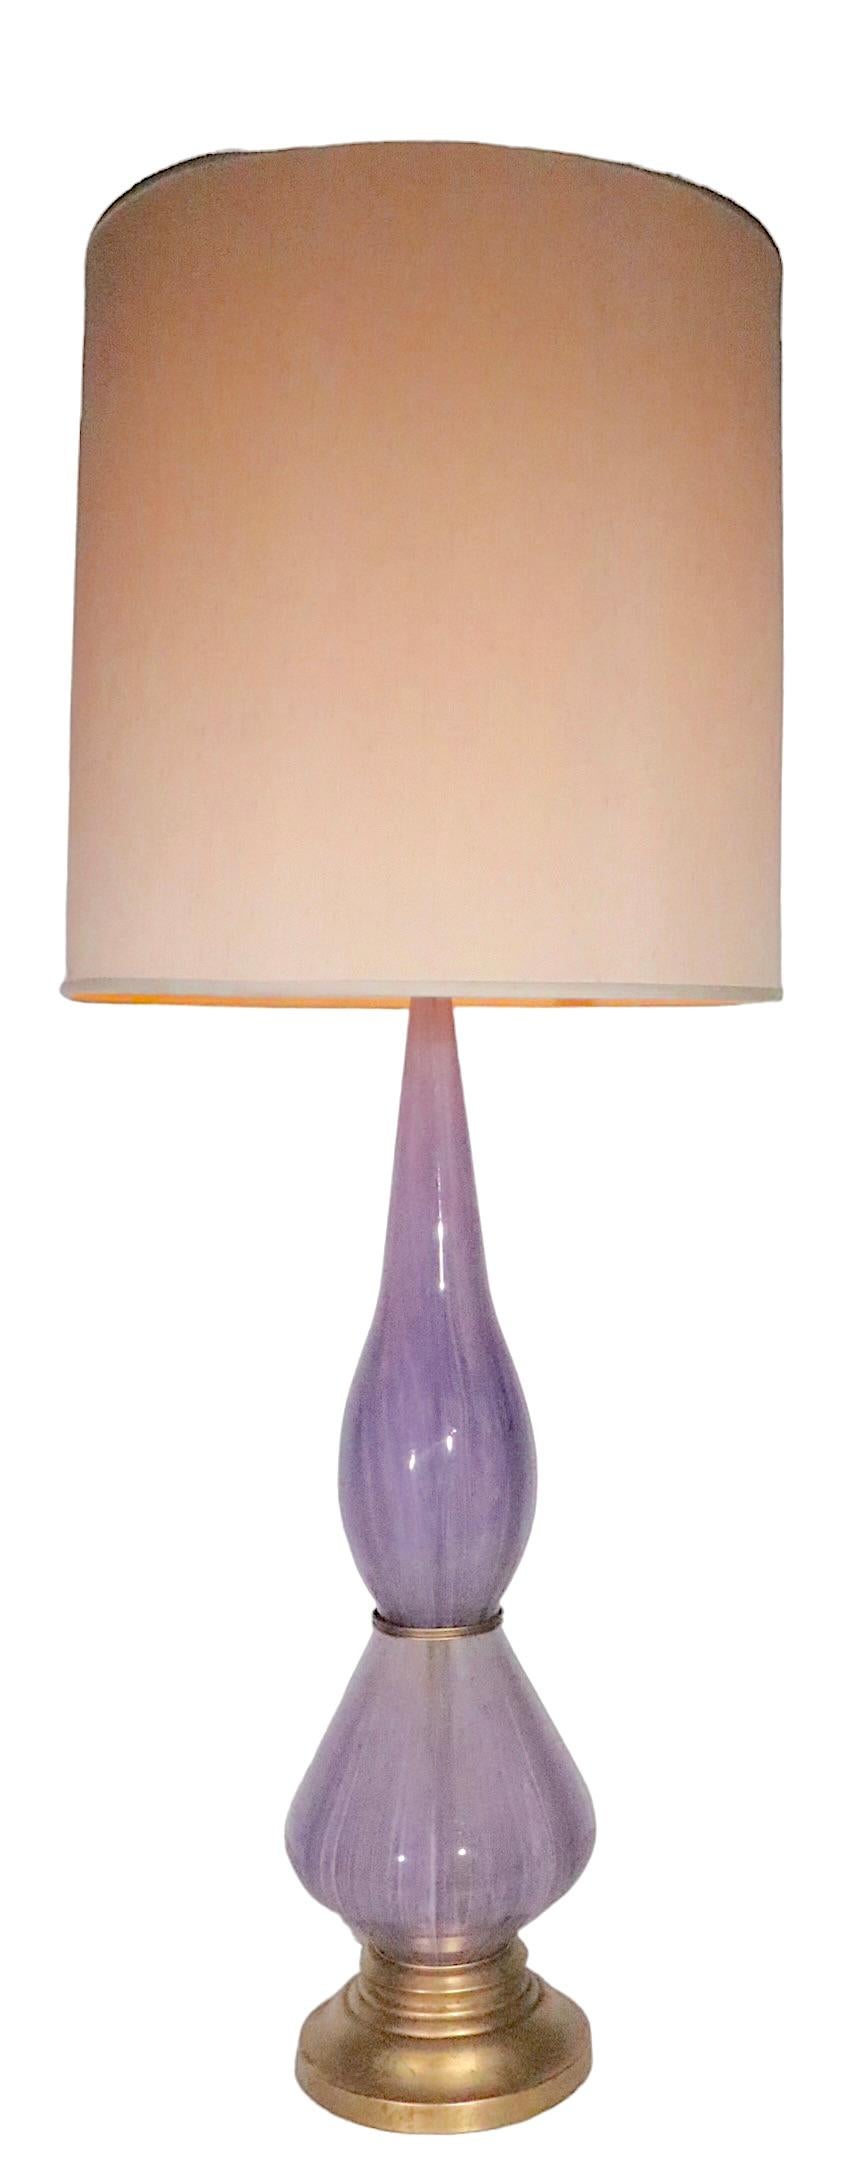 American Large Murano Glass Table Lamp in Lavender Glass, circa 1950/1960s For Sale